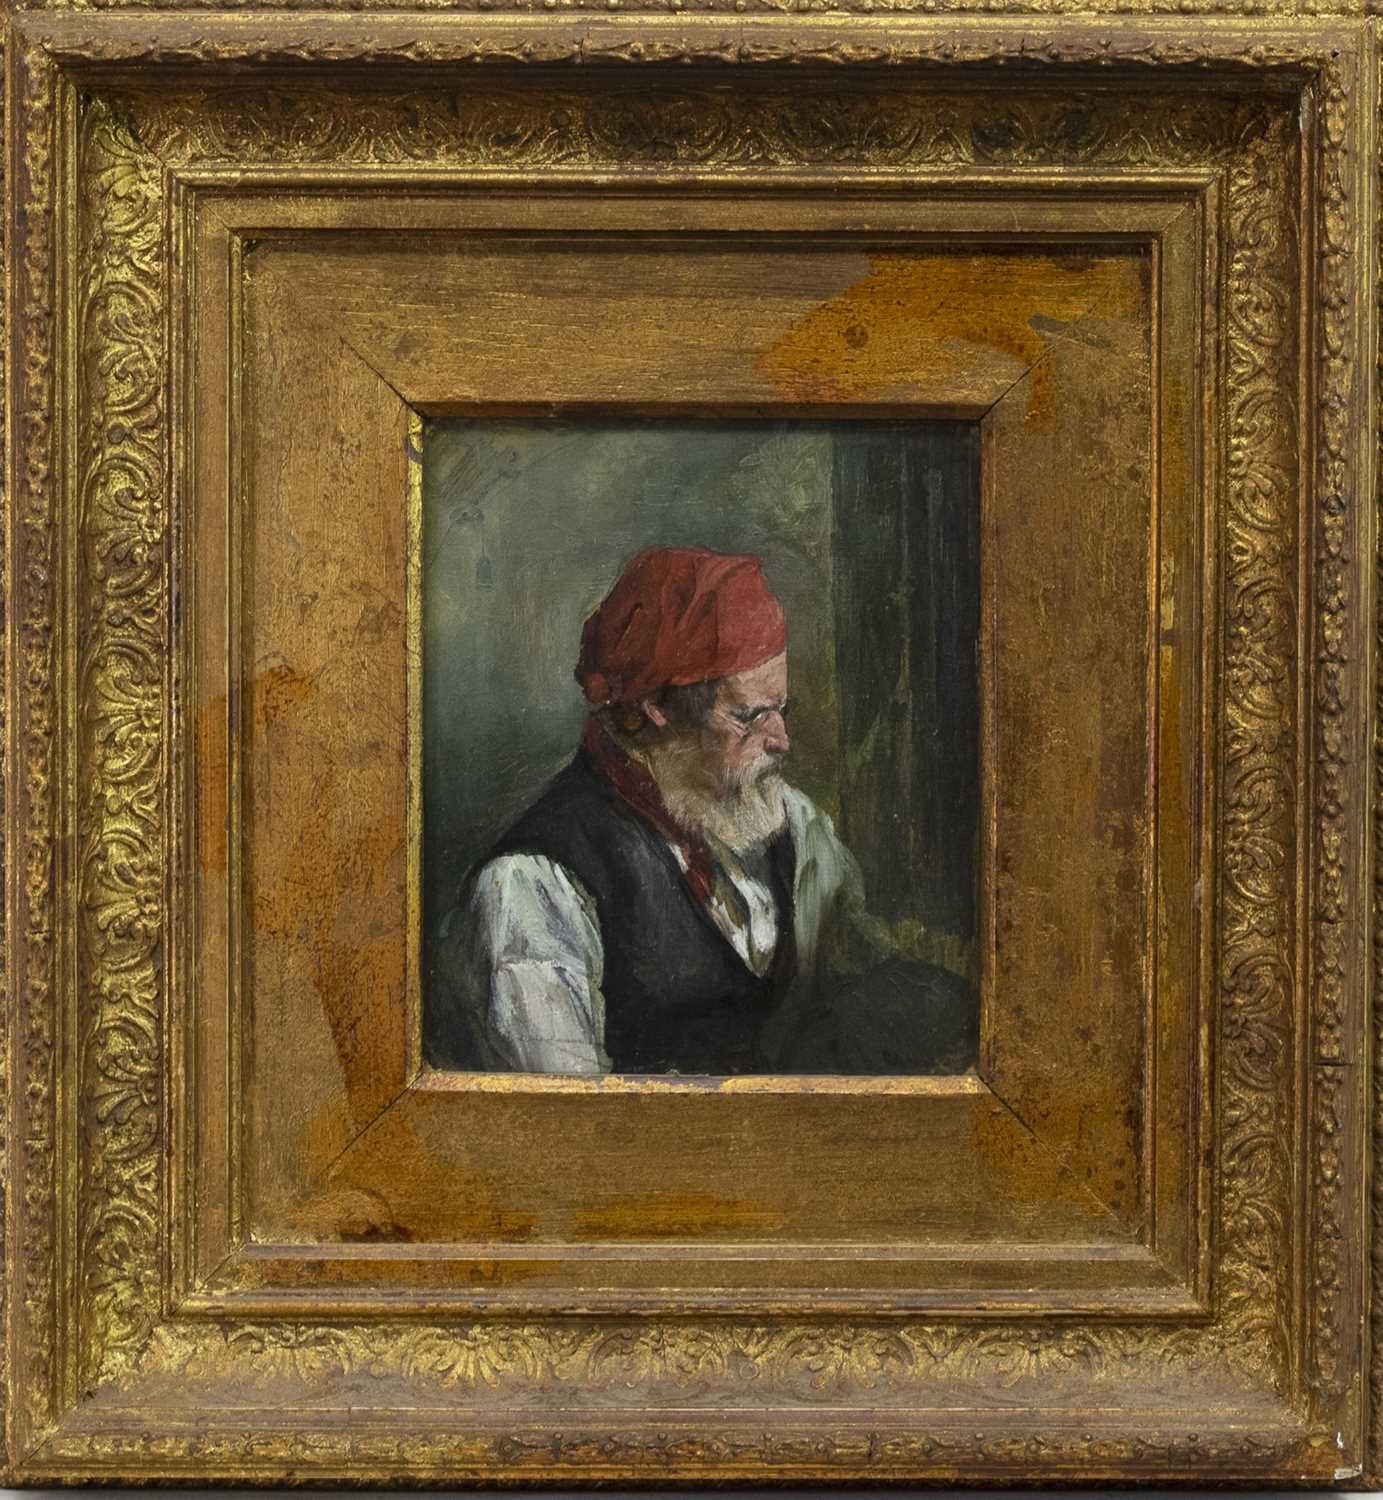 Lot 64 - 19TH CENTURY OIL STUDY OF A MAN